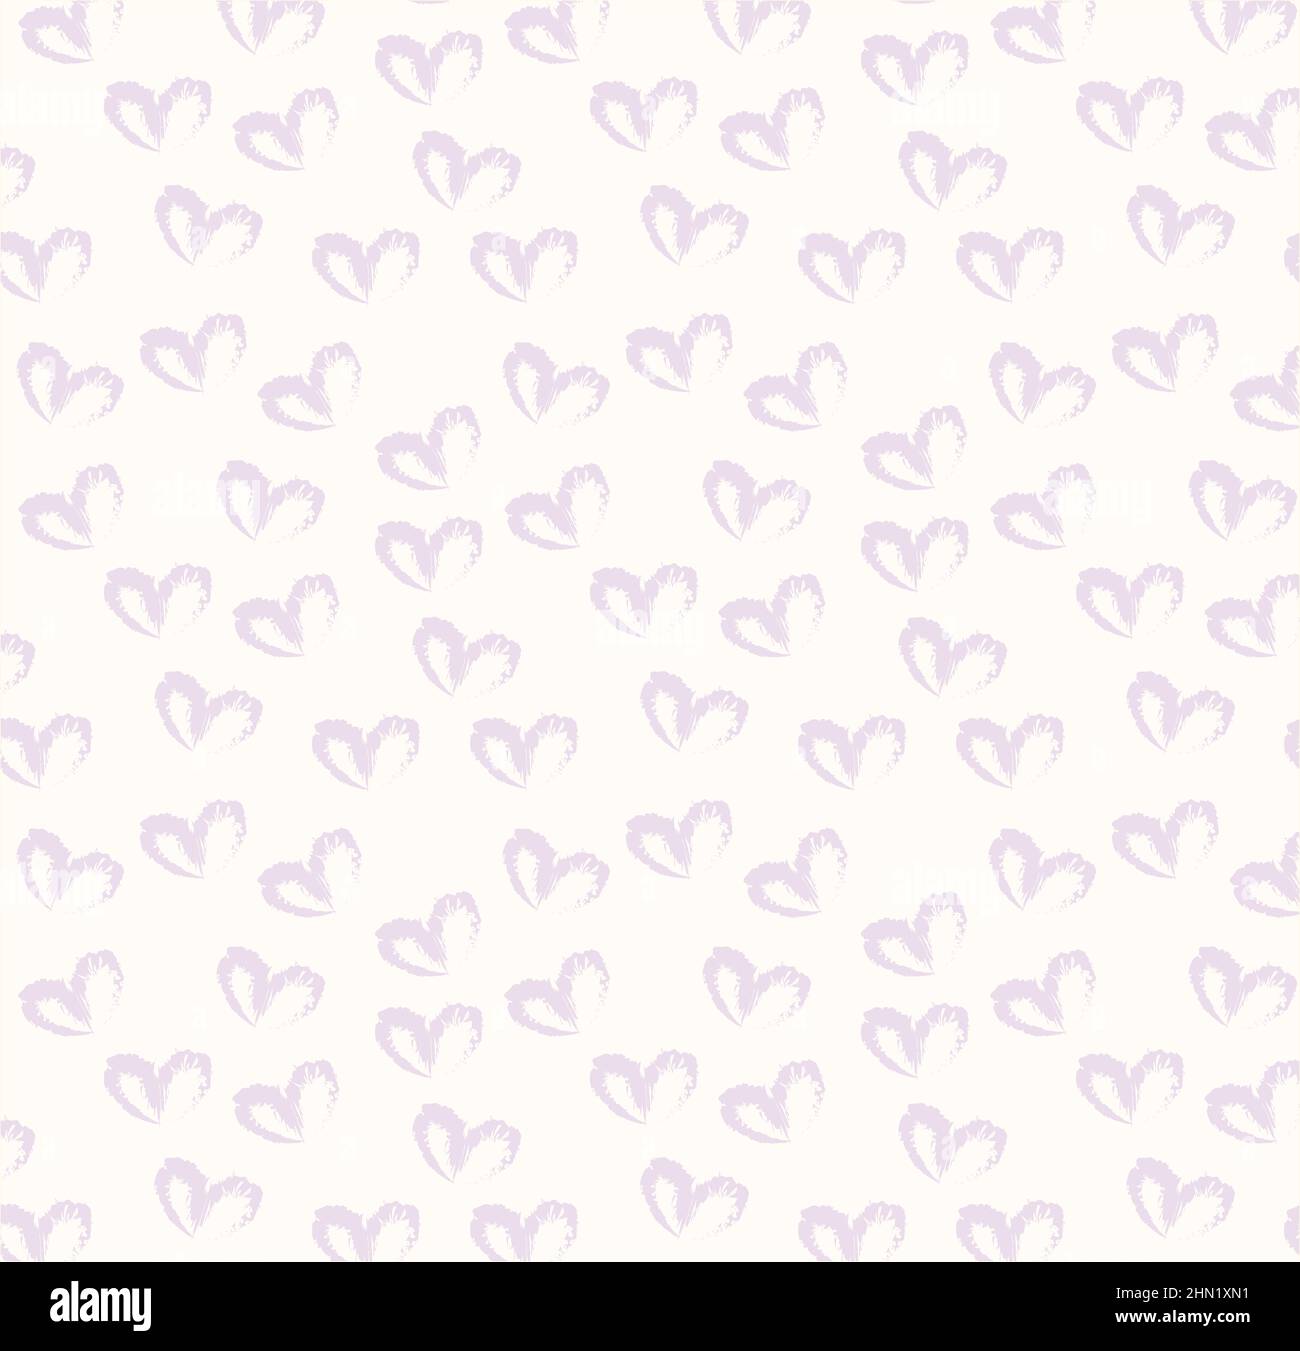 Seamless pattern of hand drawn simple hearts in pastel purple color on beige and neutral background Stock Photo